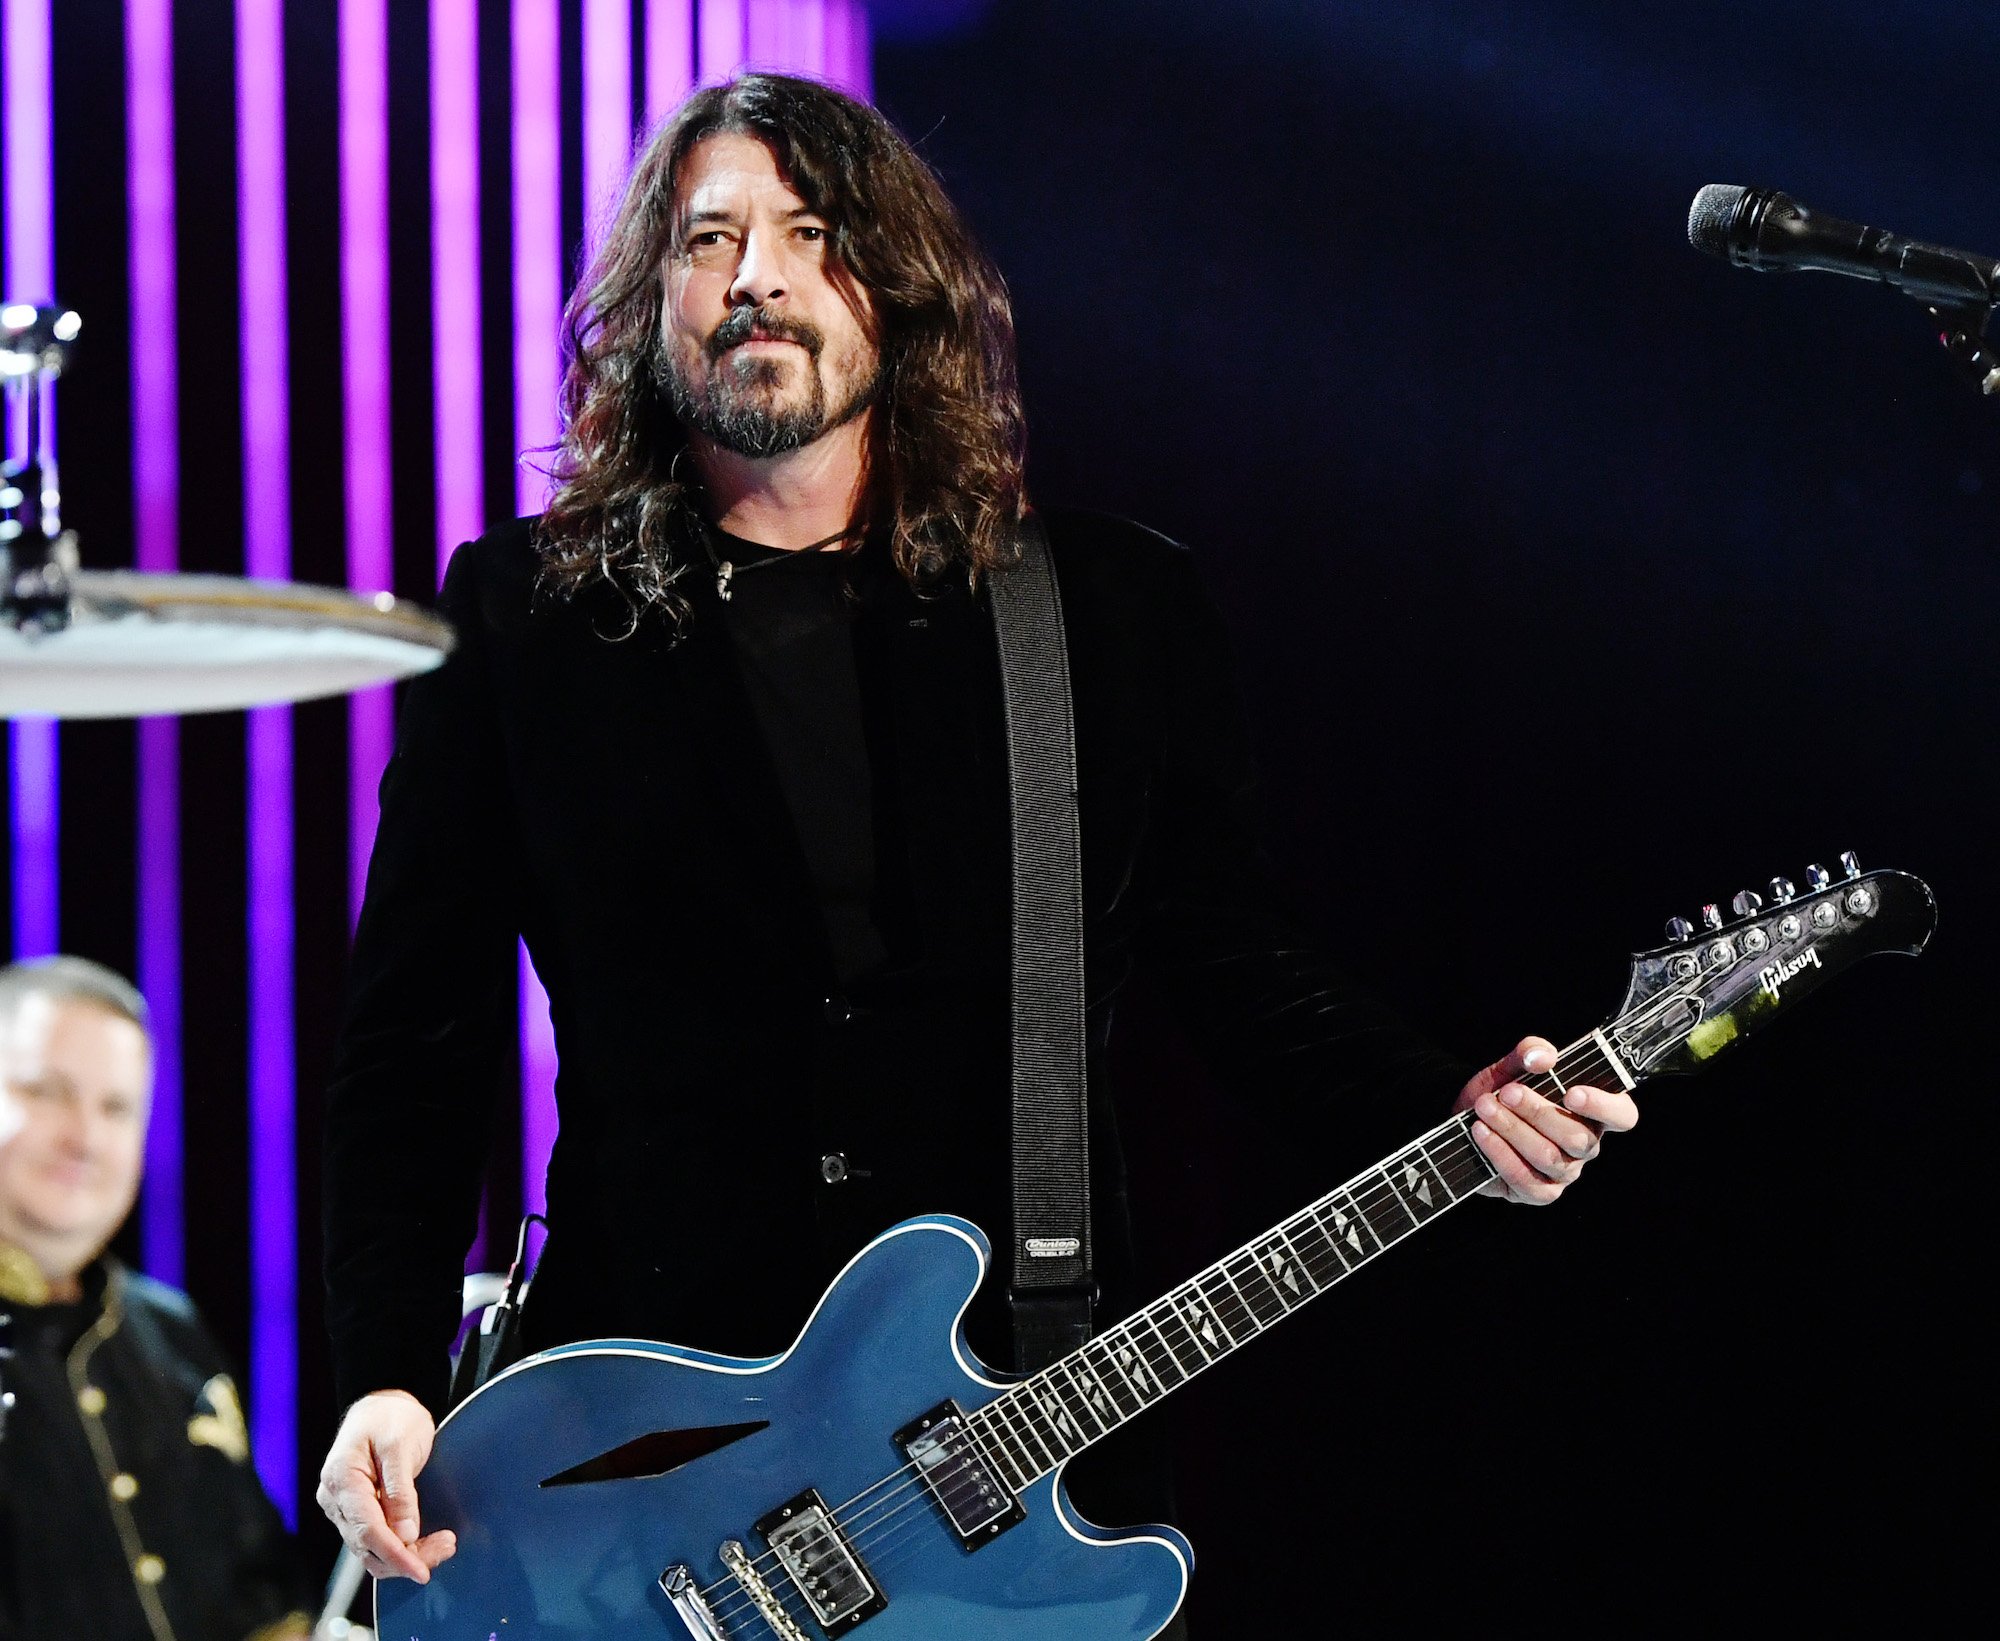 Dave Grohl slightly smiling on stage holding a guitar